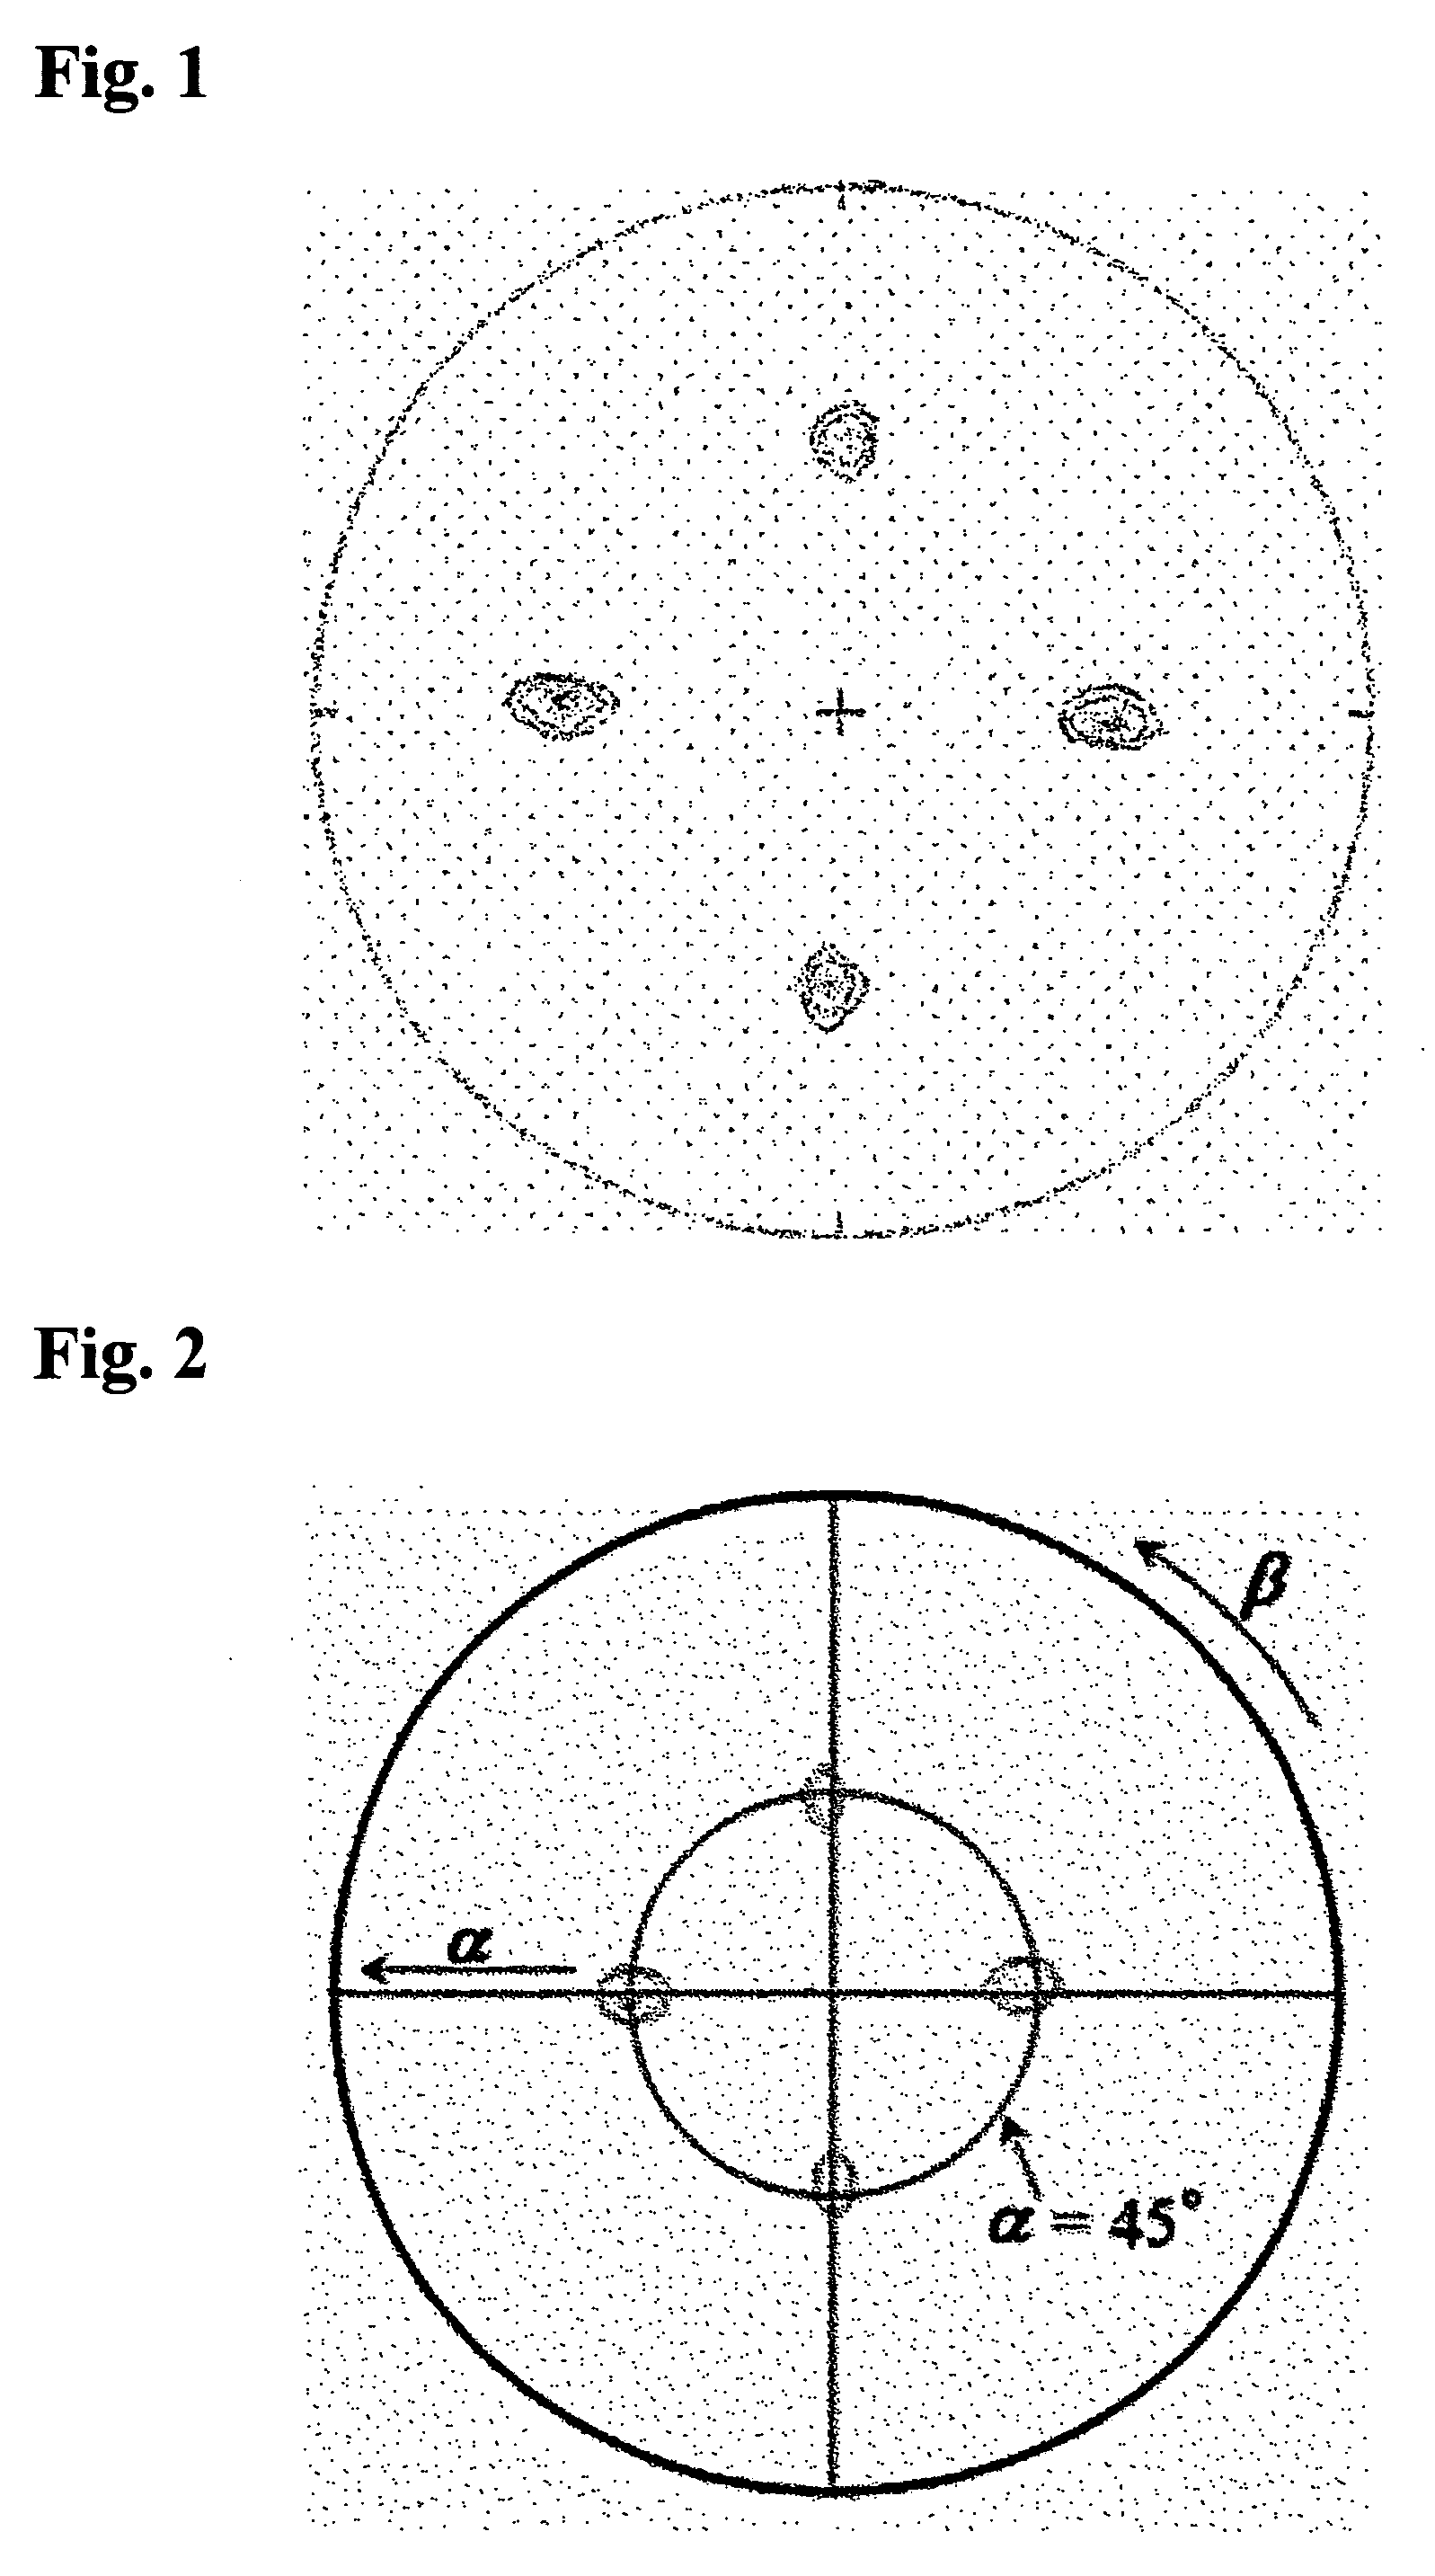 Interlayer of textured substrate for forming epitaxial film, and textured substrate for forming epitaxial film